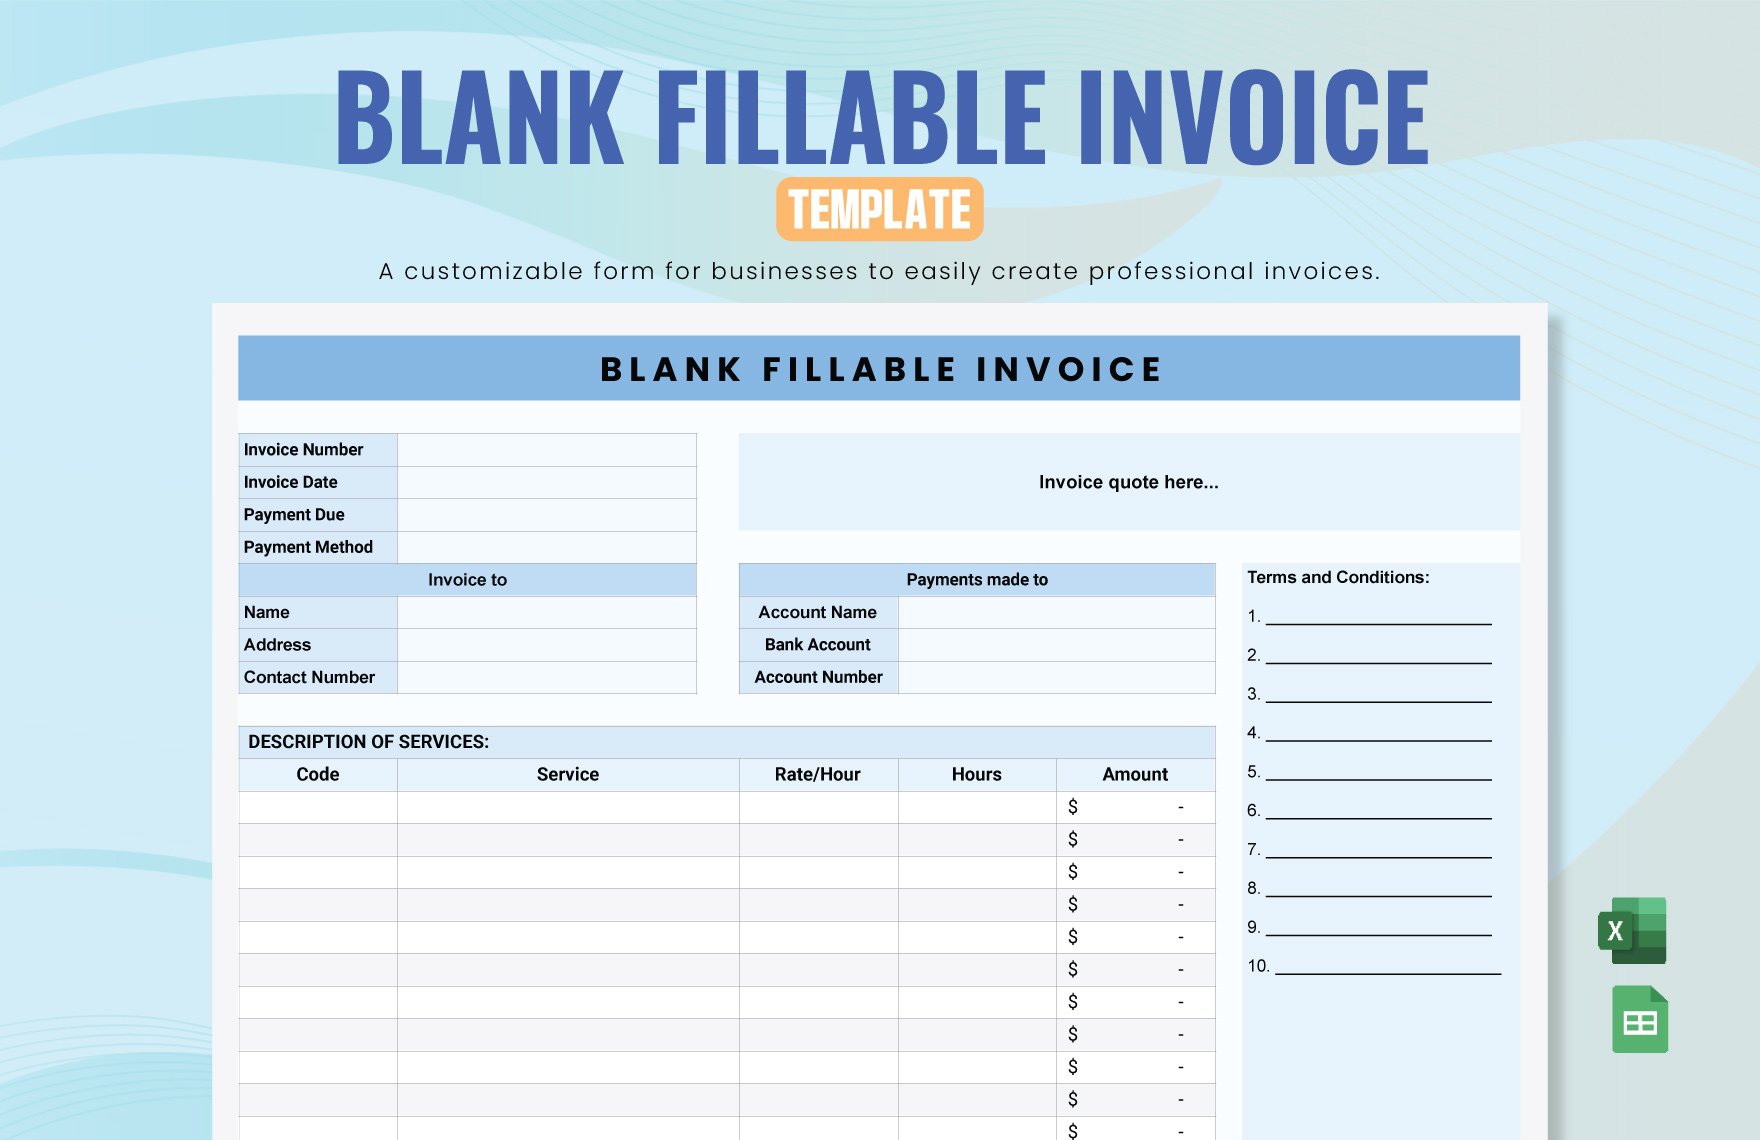 Free Blank Fillable Invoice Template in Excel, Google Sheets